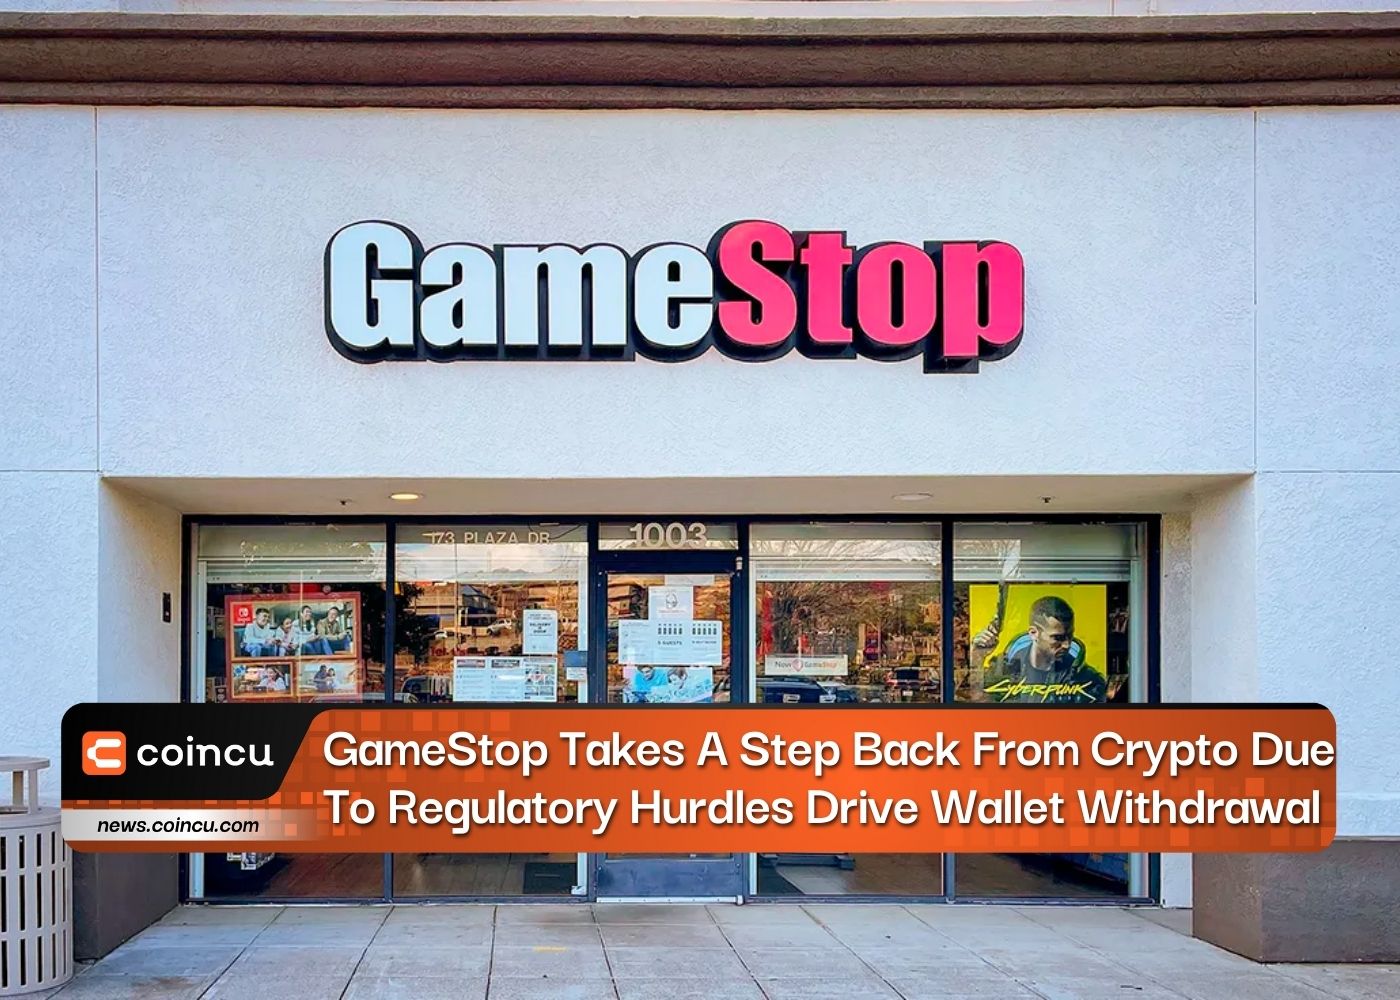 GameStop Takes A Step Back From Crypto Due To Regulatory Hurdles Drive Wallet Withdrawal